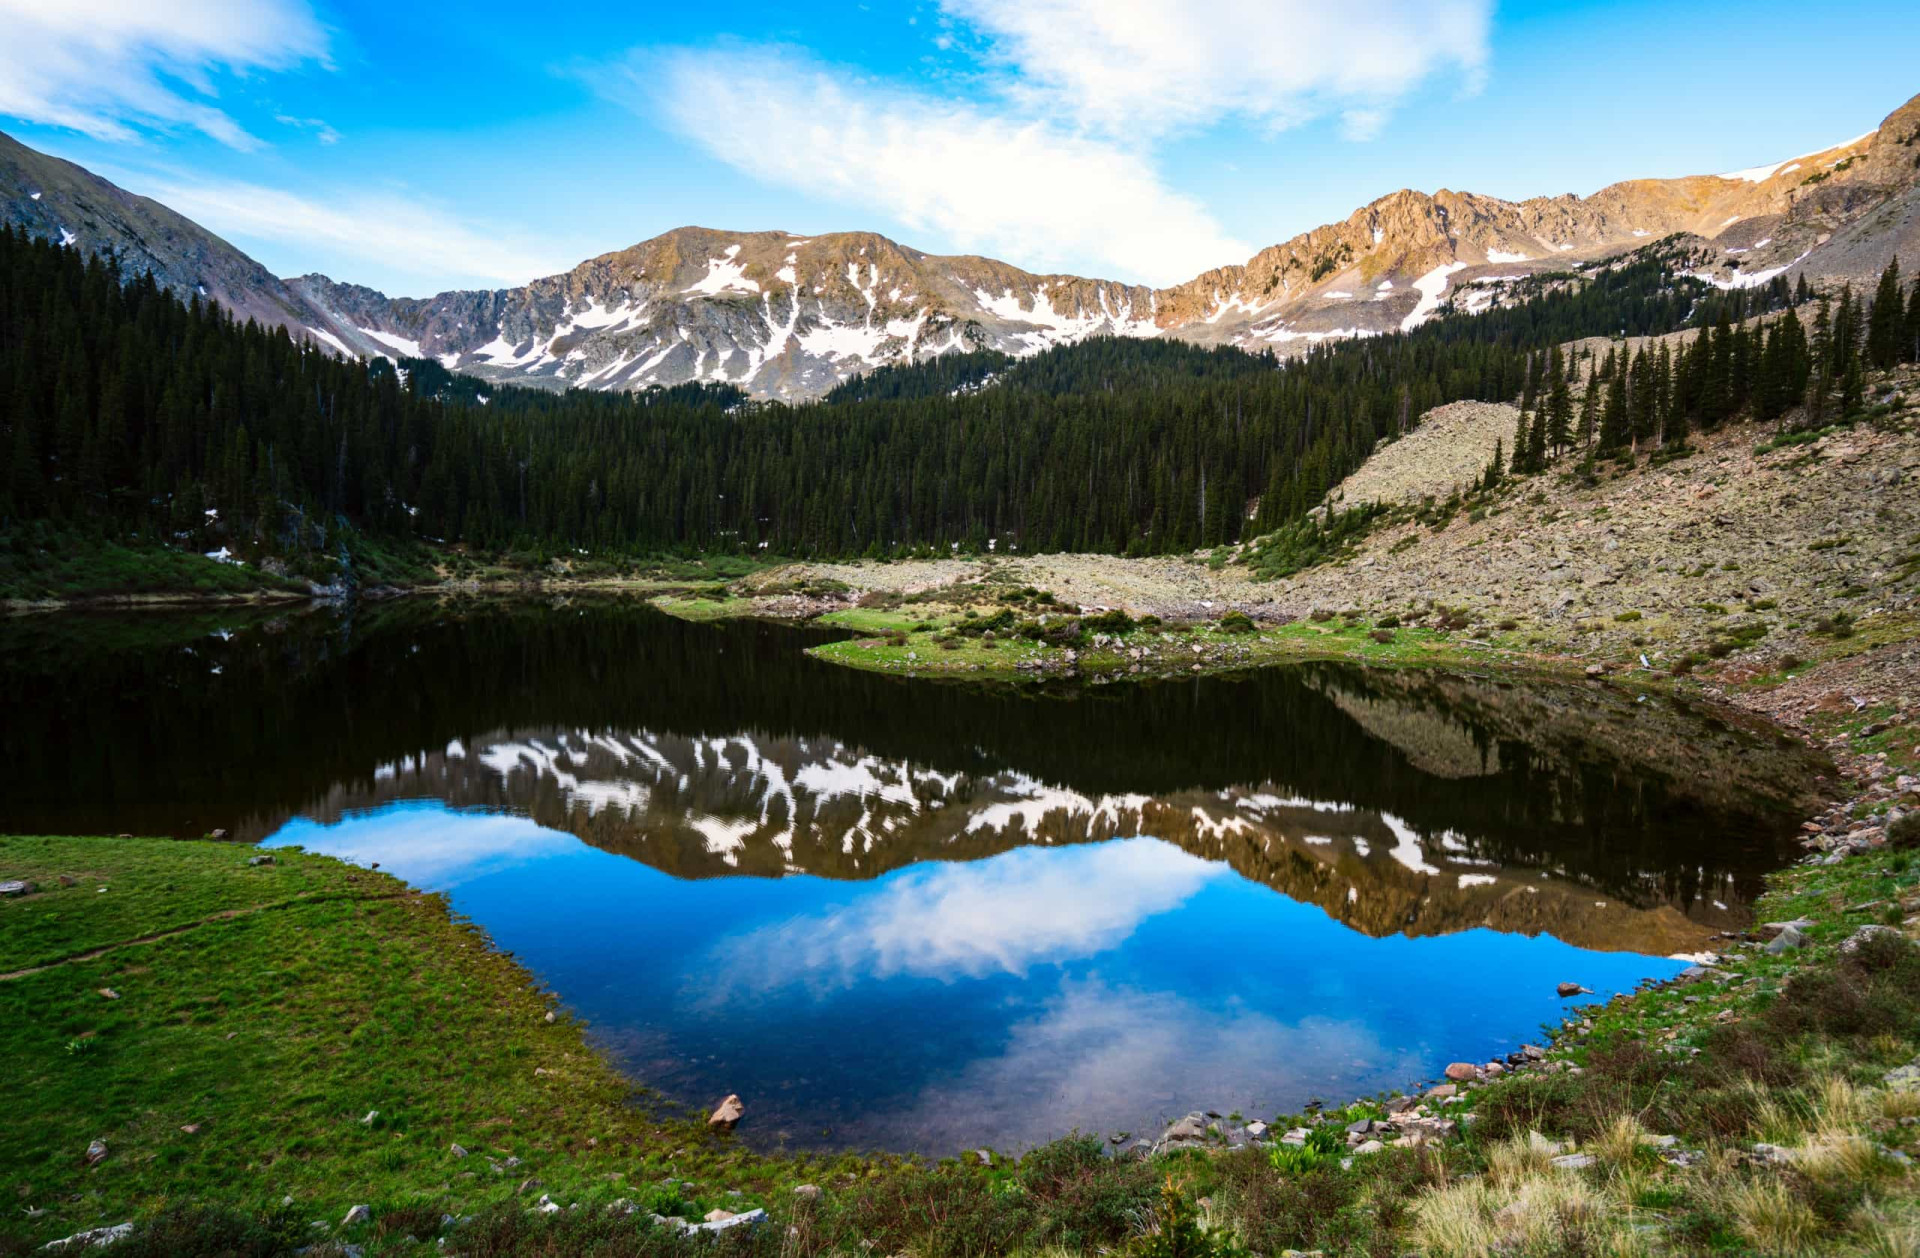 <p>New Mexico is one of the Mountain States of the southern Rocky Mountains. As such, it's a favored destination for hiking enthusiasts. The Wheeler Peak Wilderness is ideal walking territory, not least because it features the state's highest point, Wheeler Peak, which summits at 4,011 m (13,161 ft). Pictured is the mirror-like Williams Lake, a local beauty spot.</p><p>You may also like:<a href="https://www.starsinsider.com/n/388575?utm_source=msn.com&utm_medium=display&utm_campaign=referral_description&utm_content=487164v6en-en"> Trust issues: crazy celebrity prenups</a></p>